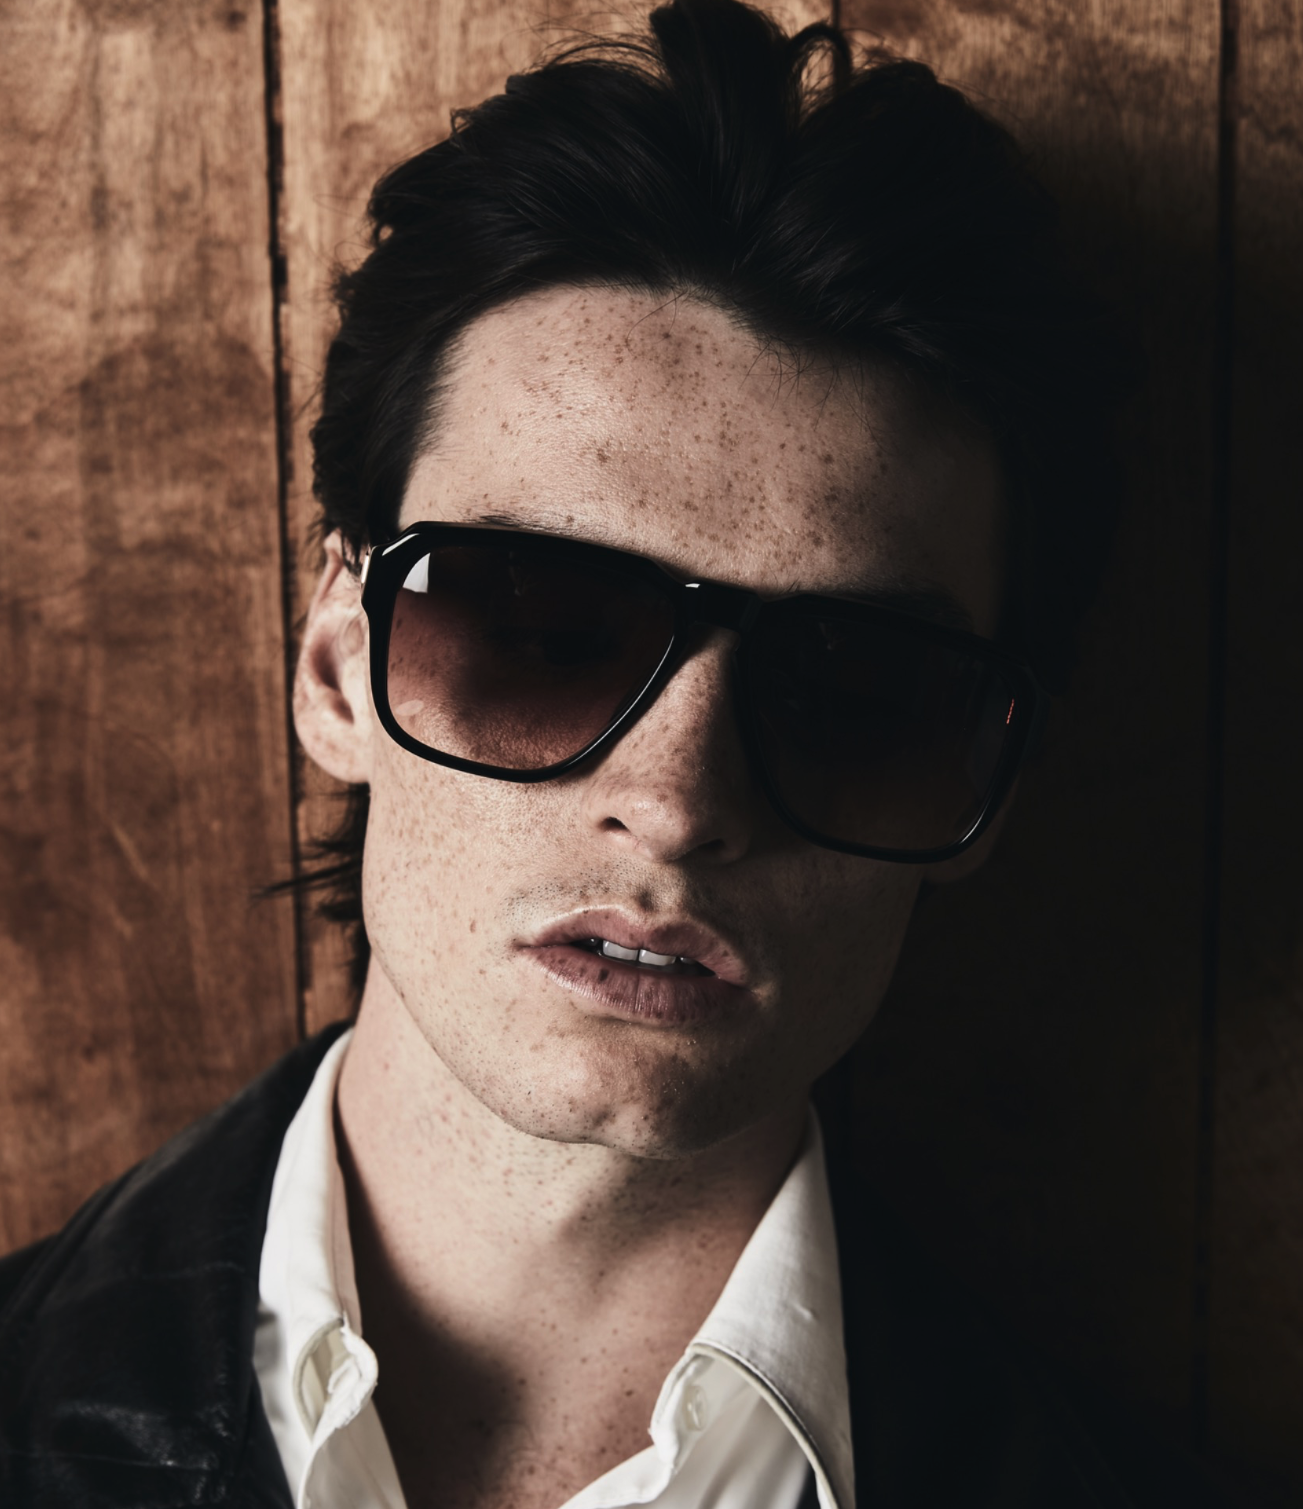 Jacques Marie Mage Savoy Sunglasses